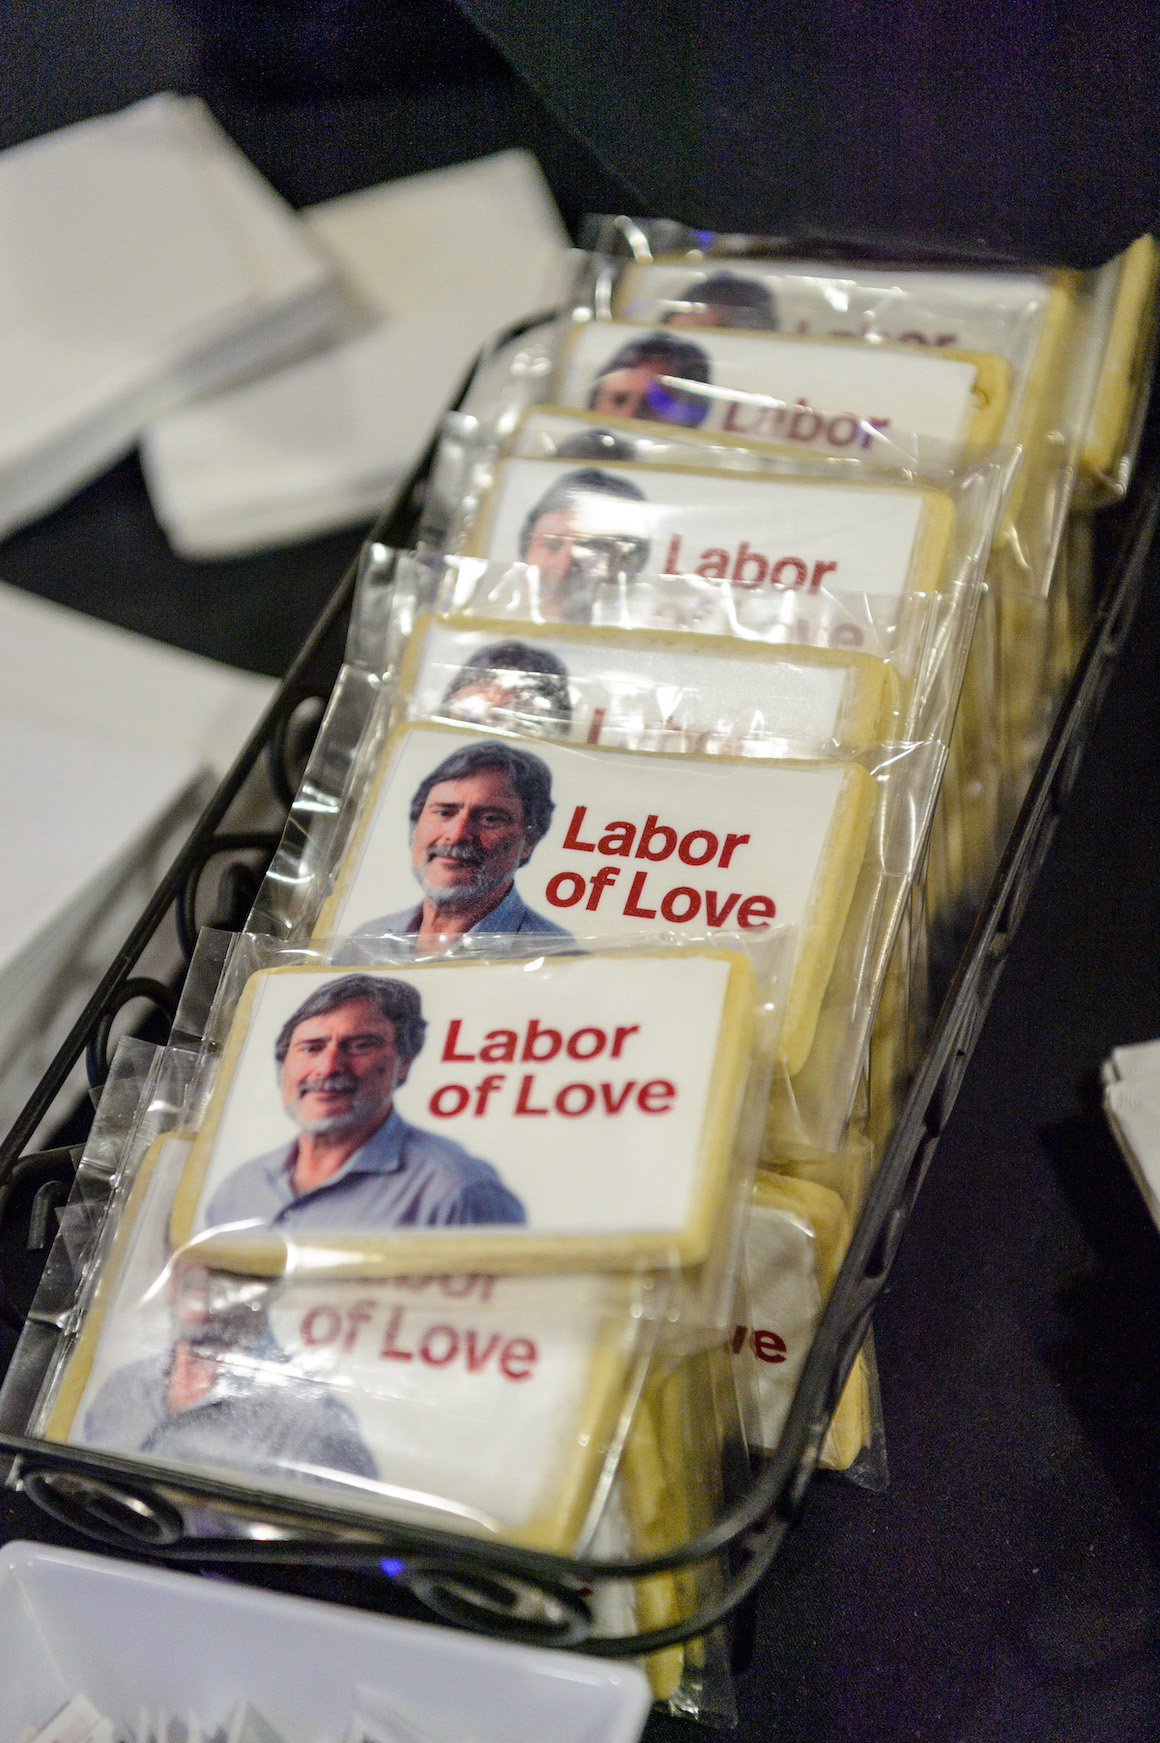 Limited-edition Karl Klare cookies were a big hit!